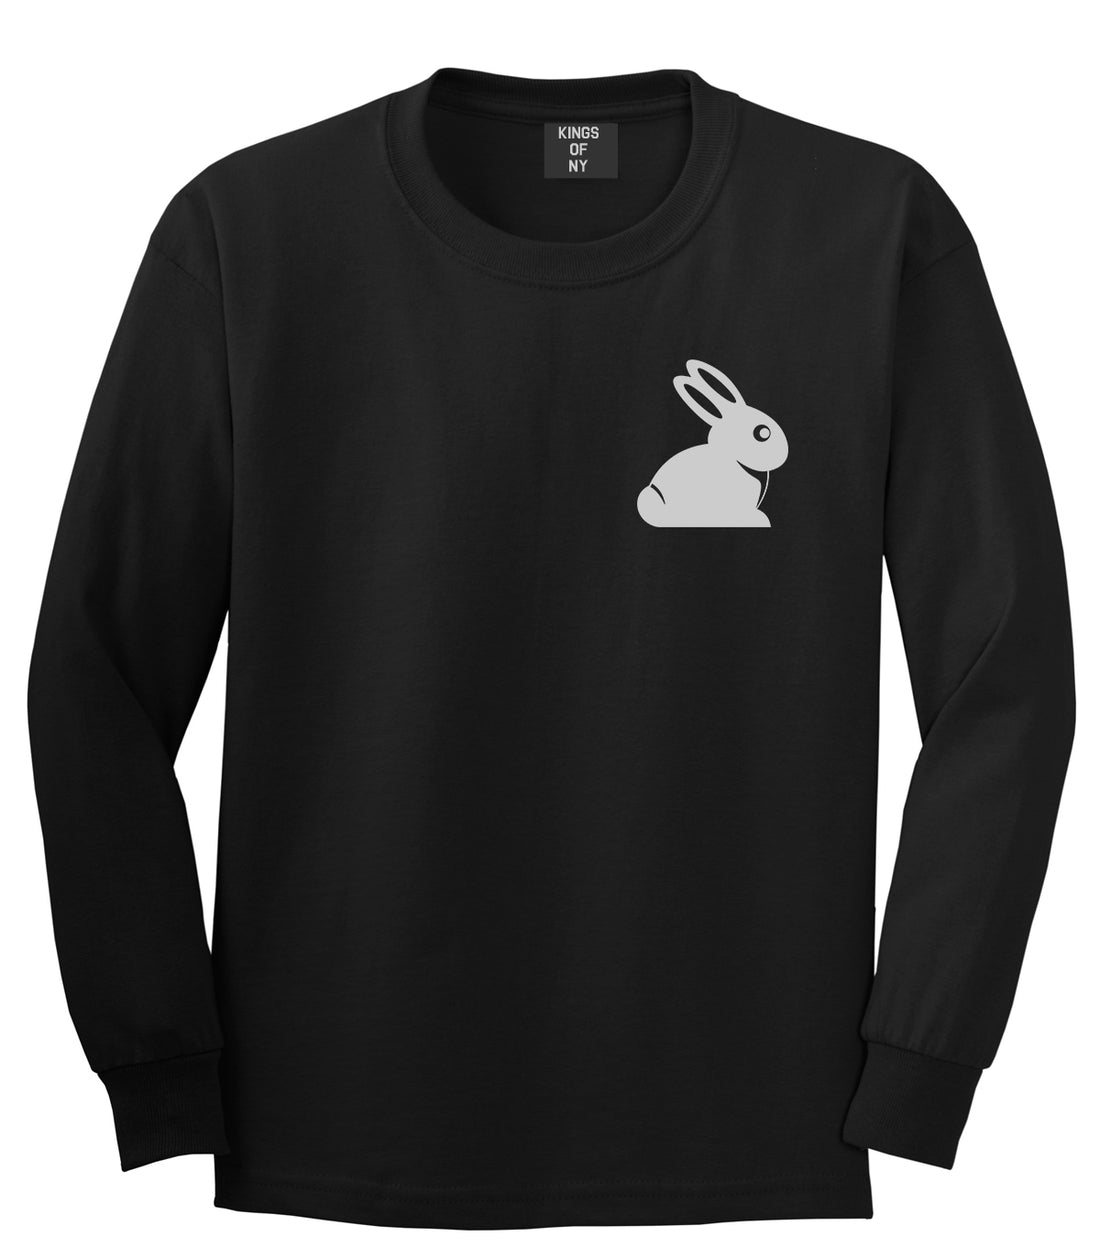 Easter Bunny Rabbit Chest Mens Black Long Sleeve T-Shirt by Kings Of NY